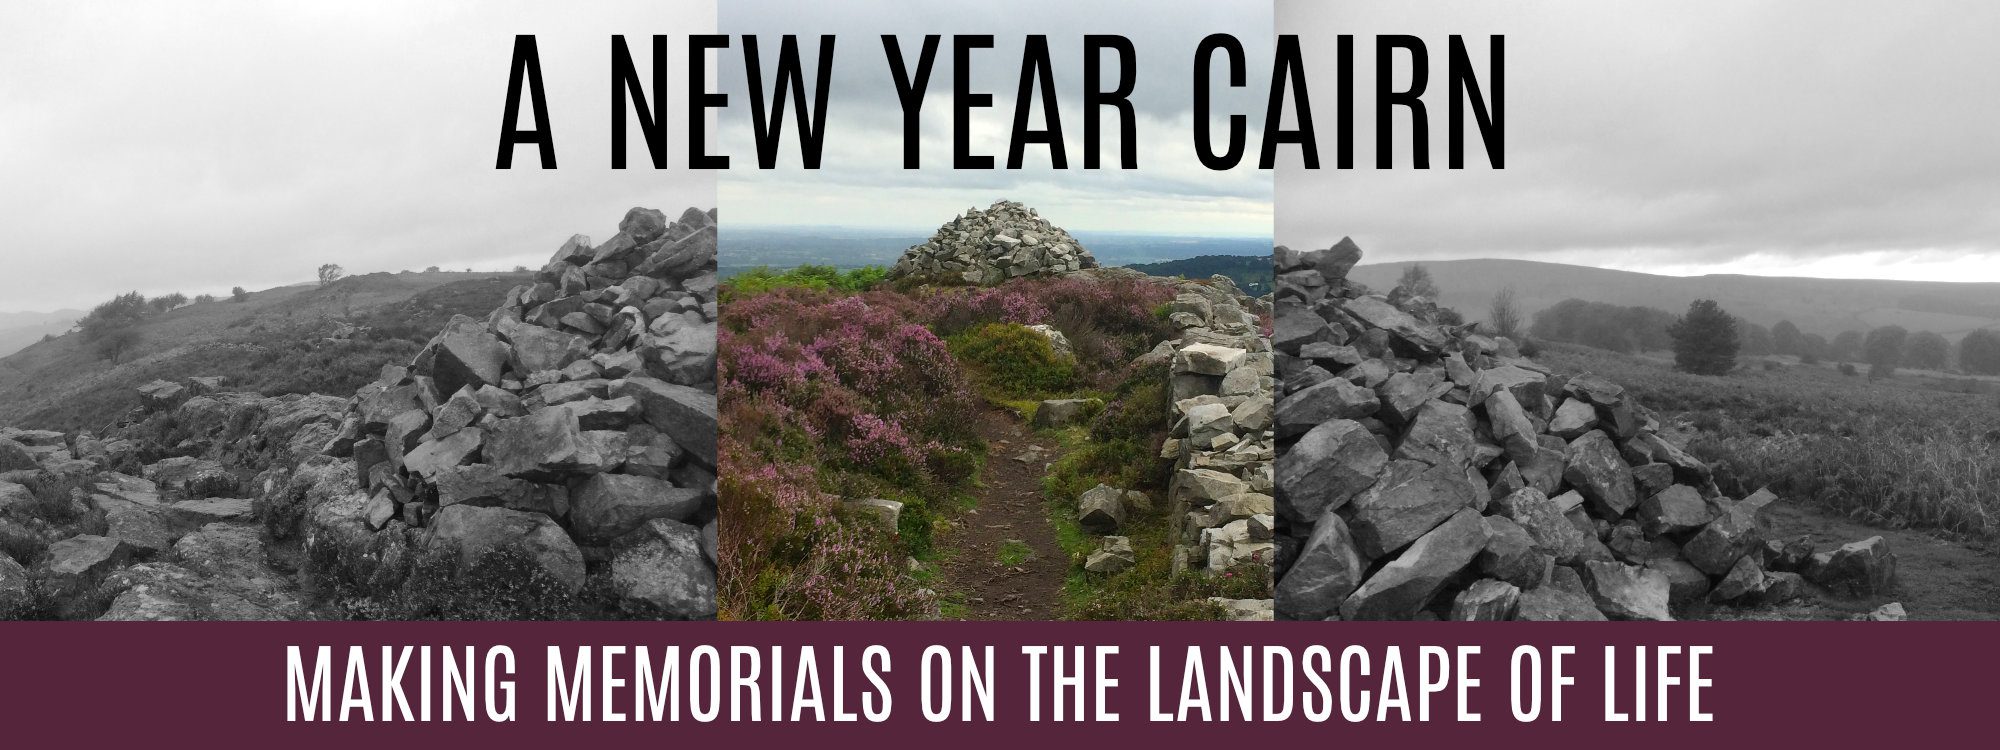 A NEW YEAR CAIRN - making memorials on the landscape of life